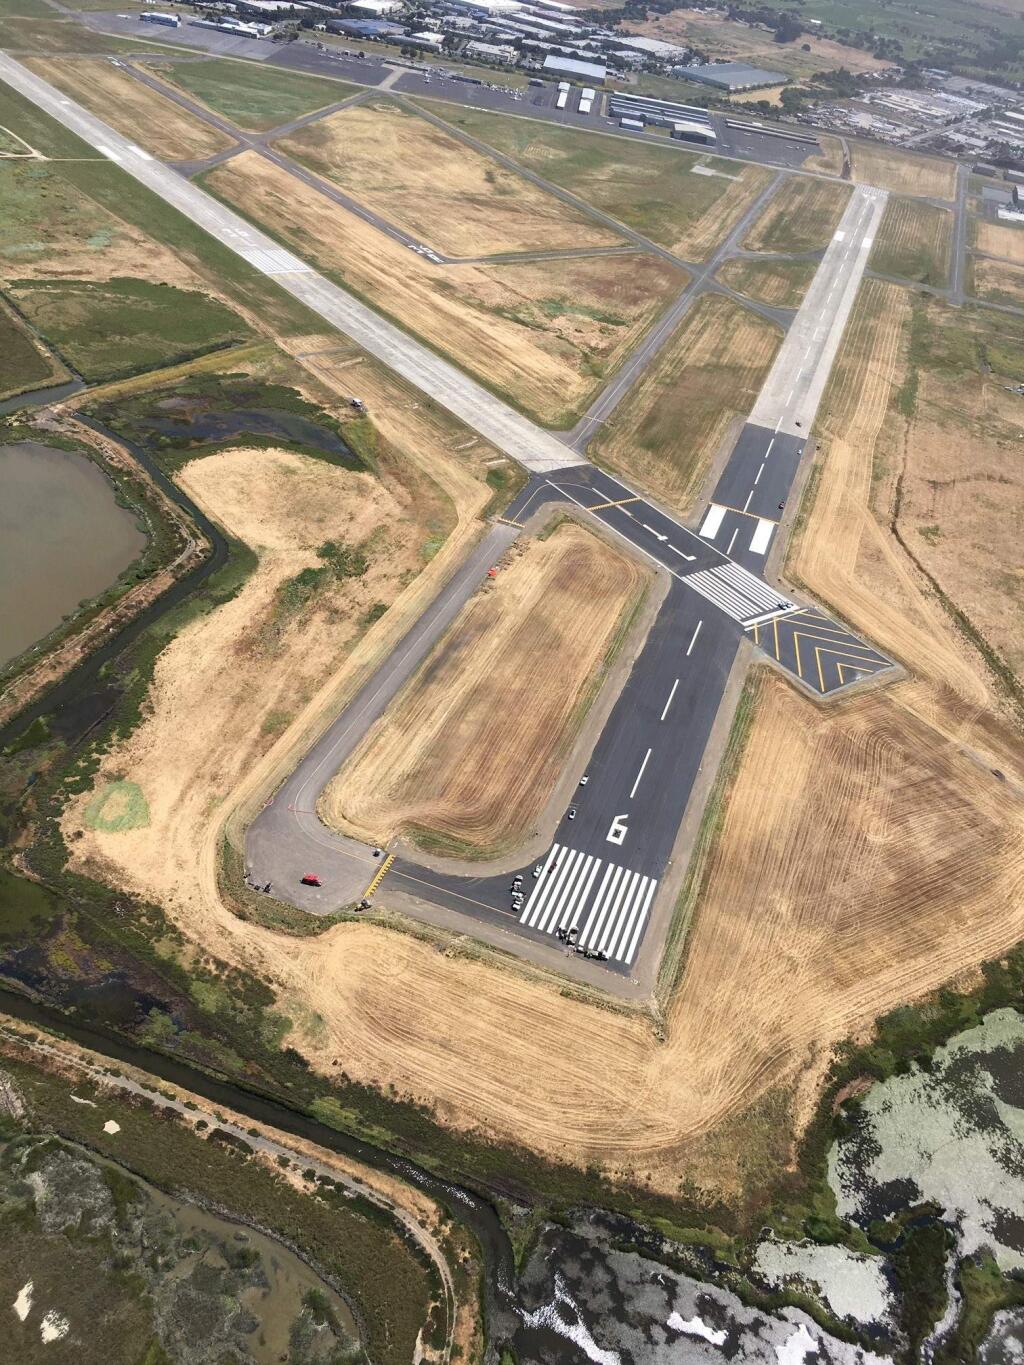 Repaving of the Napa County Airport has been selected as a winner of a 2019 Journal Top Real Estate Projects Award. (Courtesy Photo)